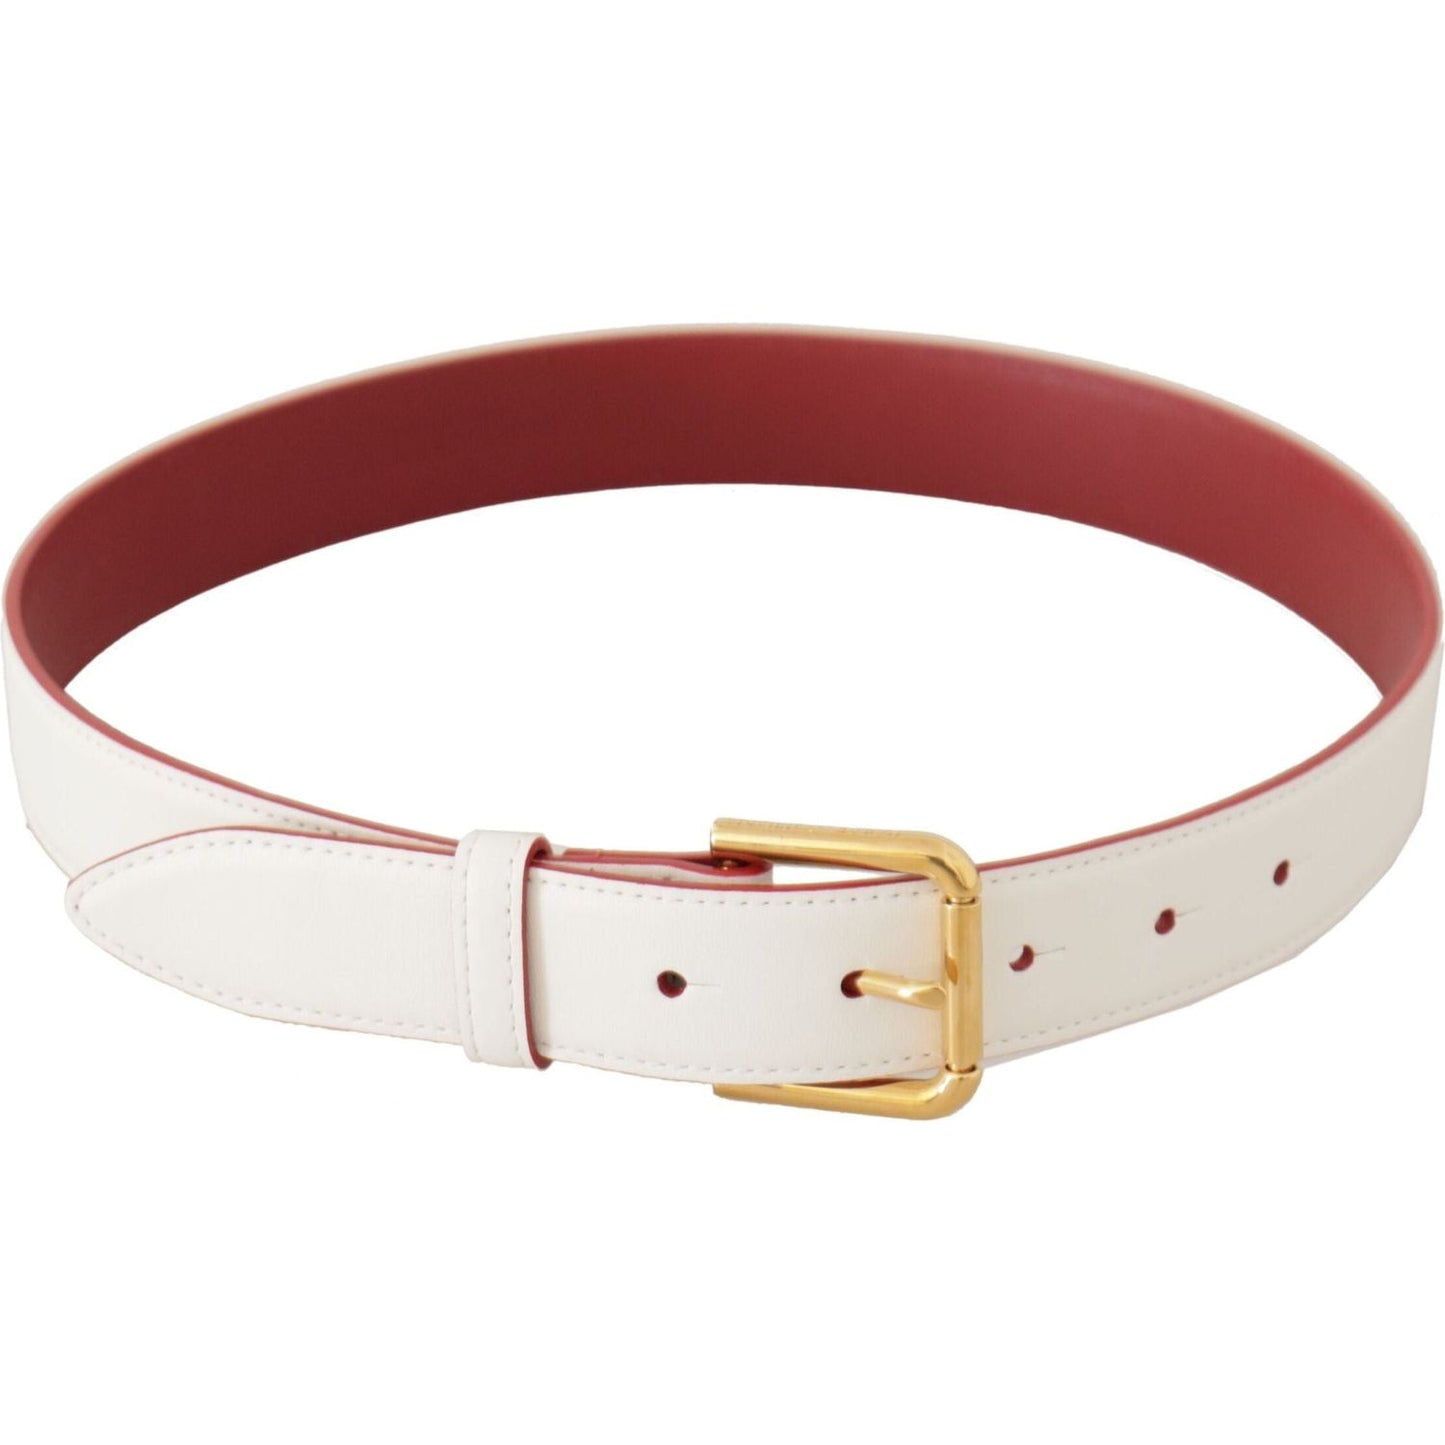 Dolce & Gabbana Elegant White Leather Belt with Engraved Buckle white-calf-leather-two-toned-gold-metal-buckle-belt